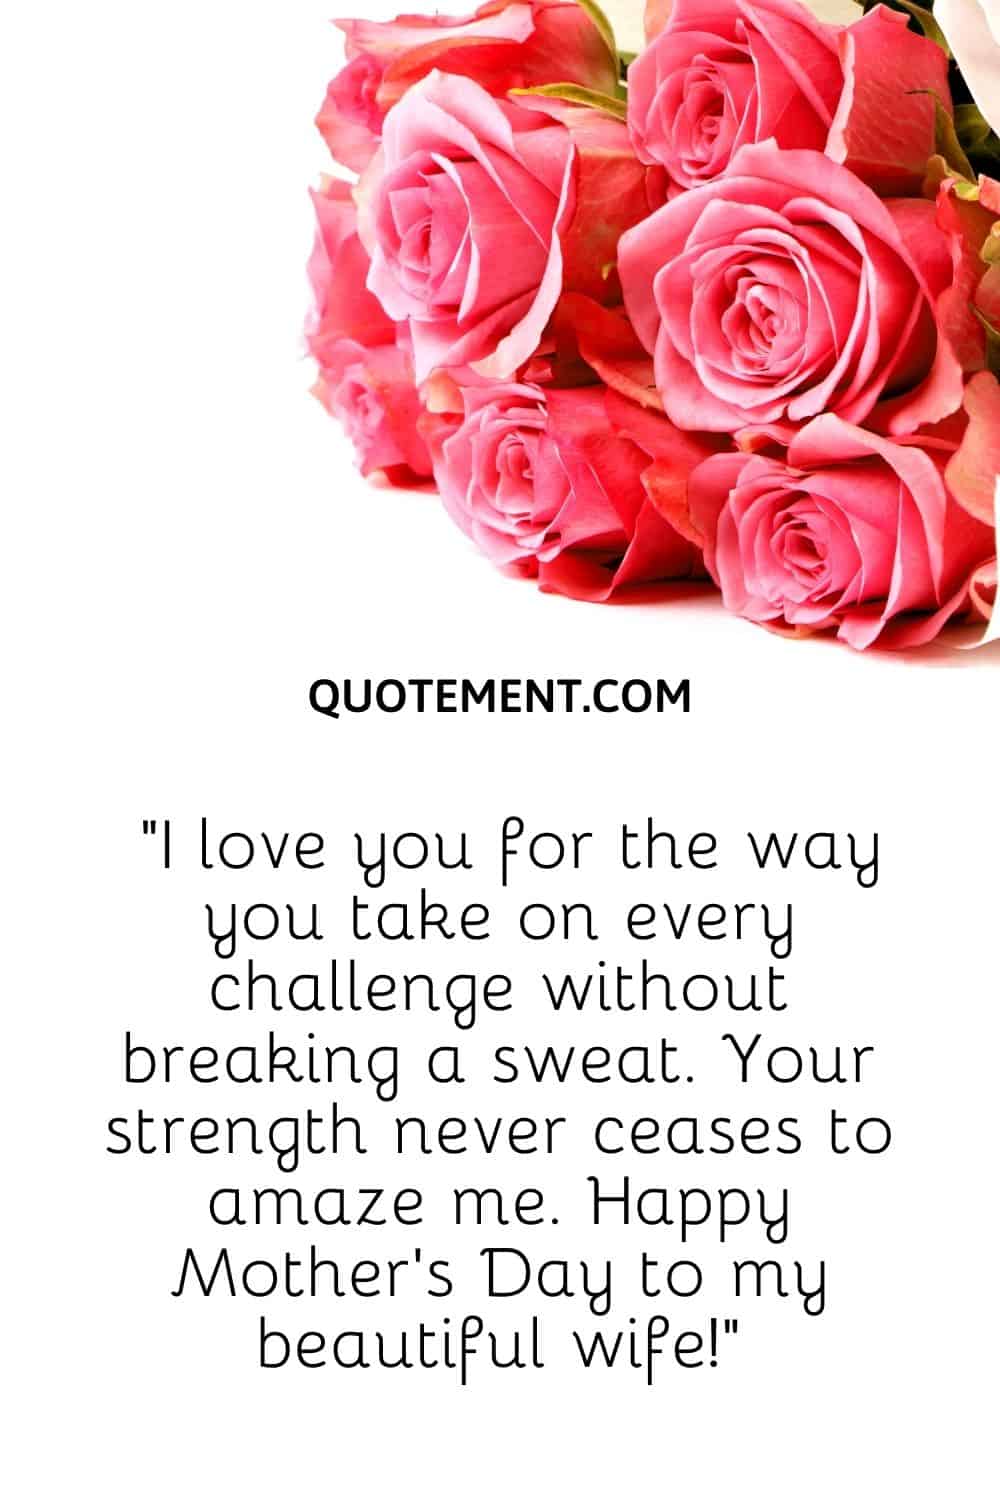 I love you for the way you take on every challenge without breaking a sweat